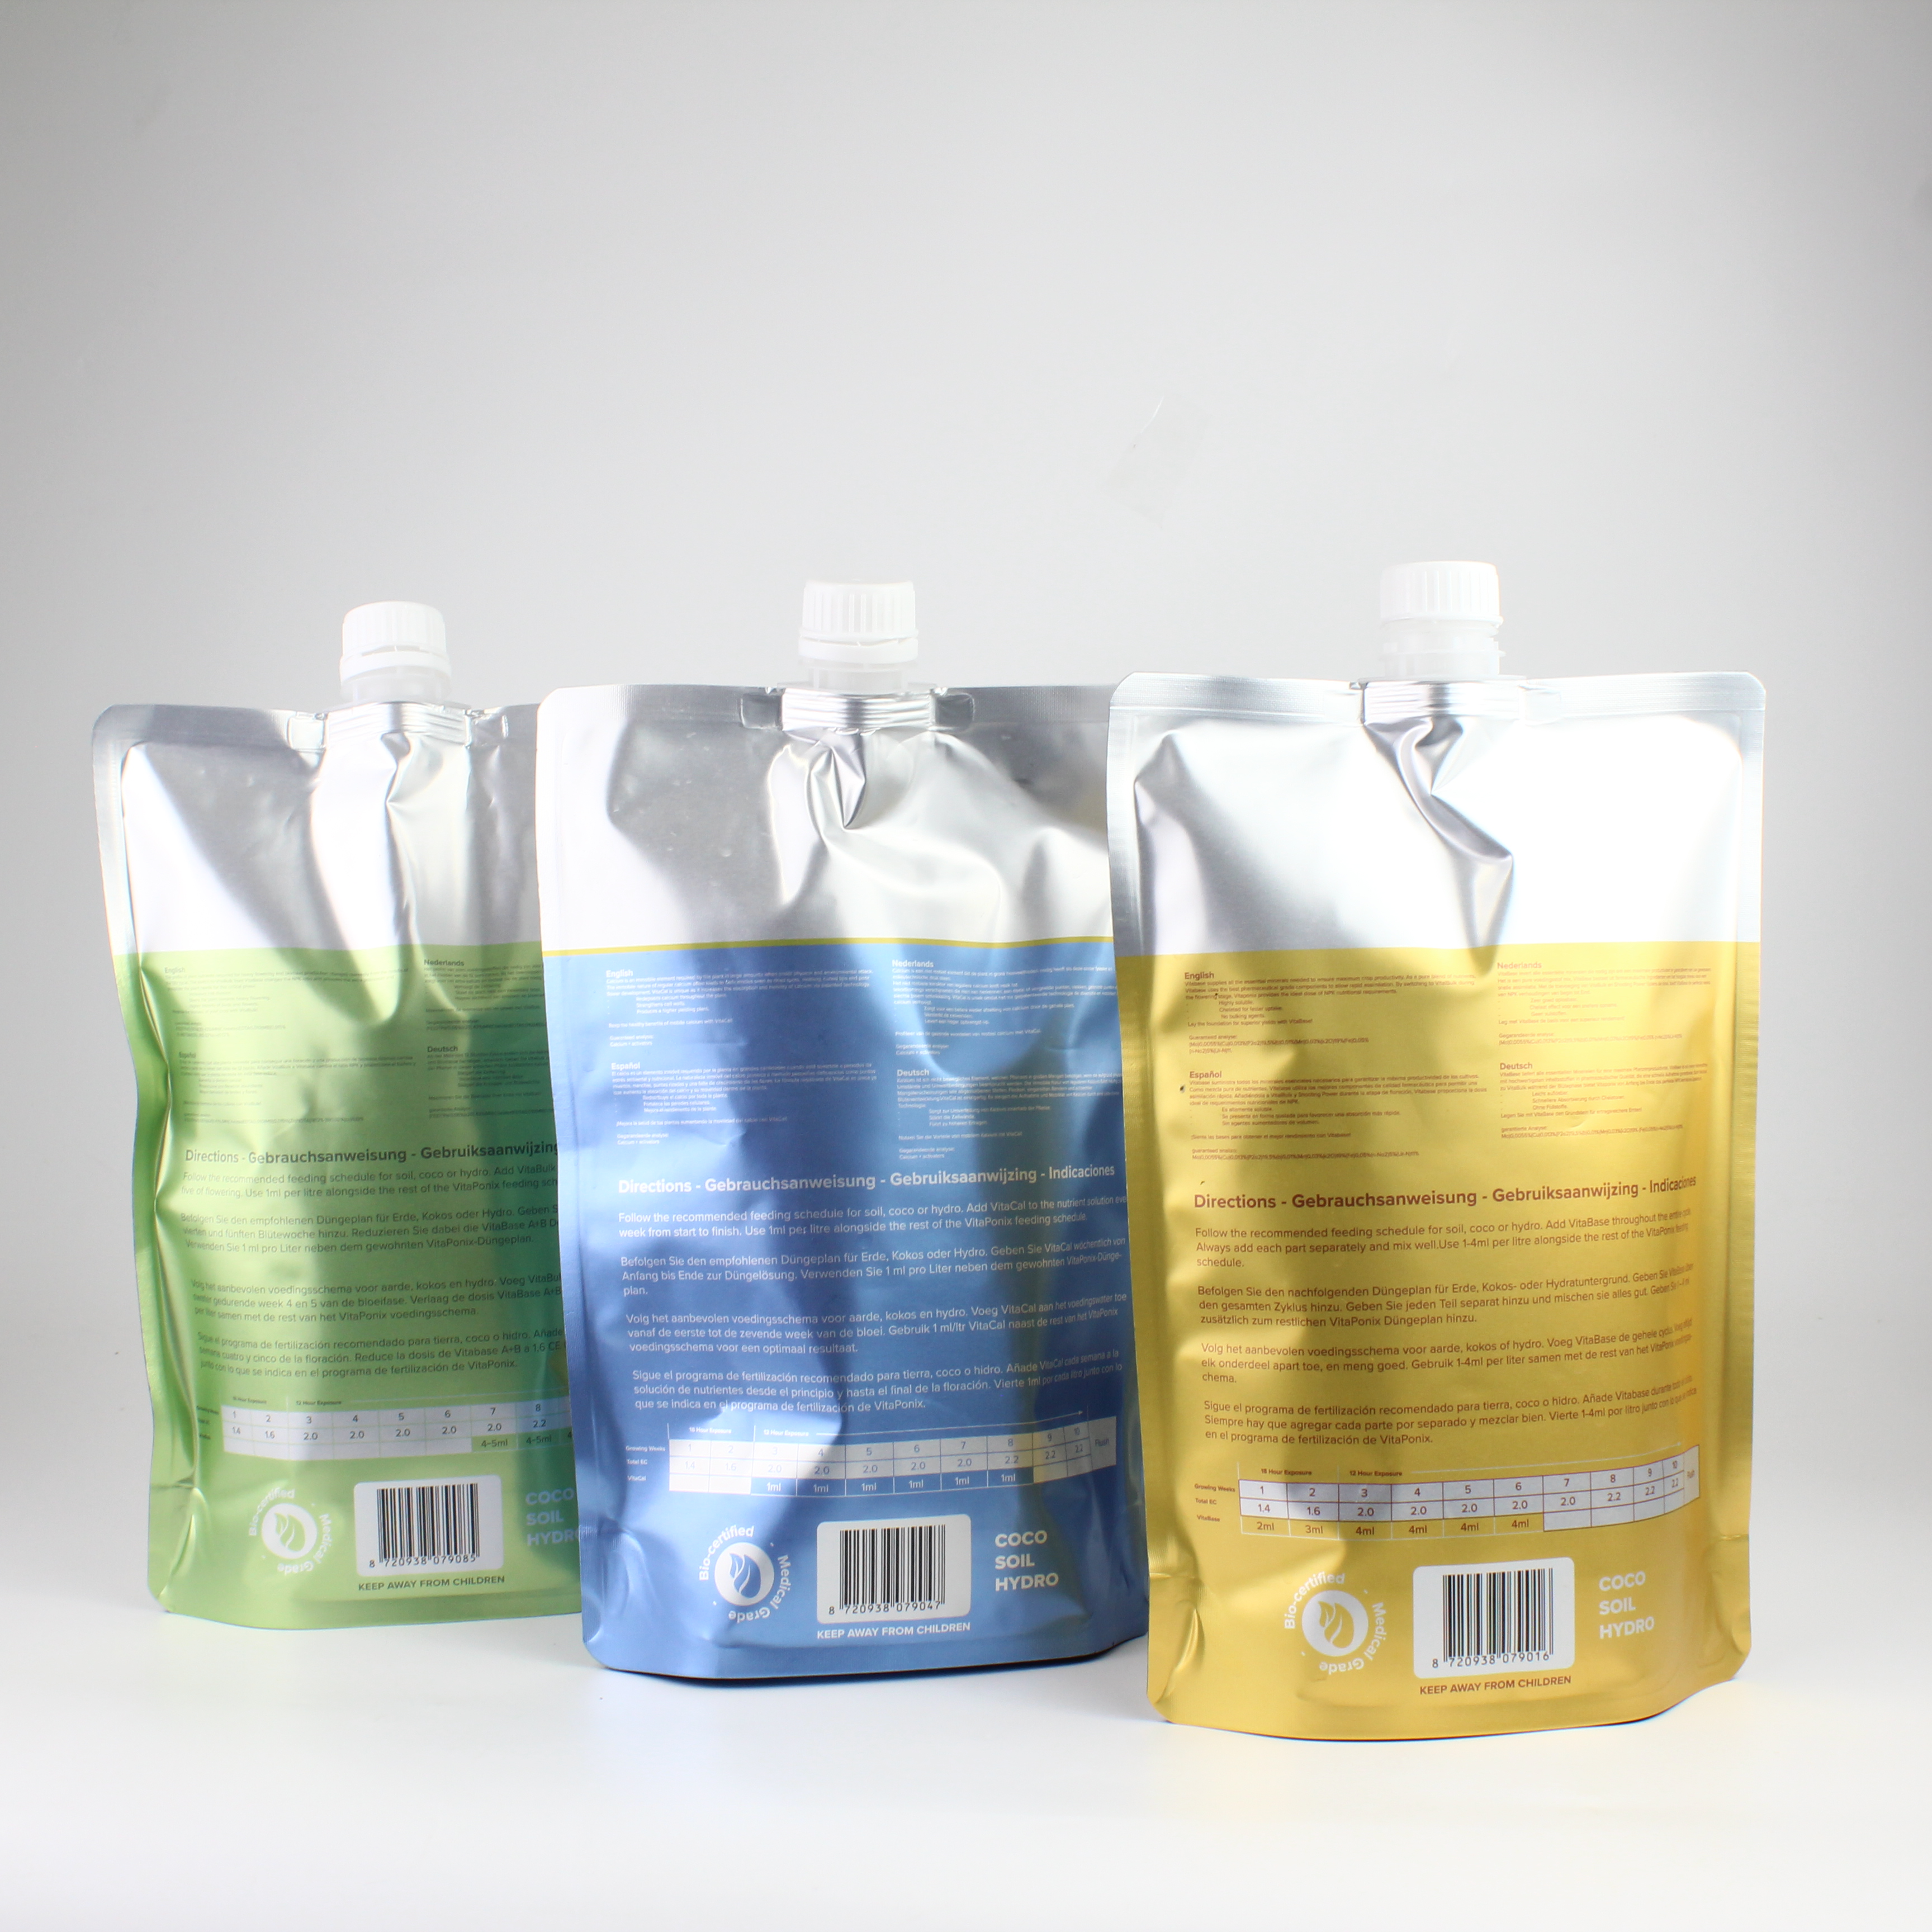 https://www.toppackcn.com/1l-custom-printed-spouted-stand-up-bag-barrel-pouch-liquid-packaging-with-spigot-product/